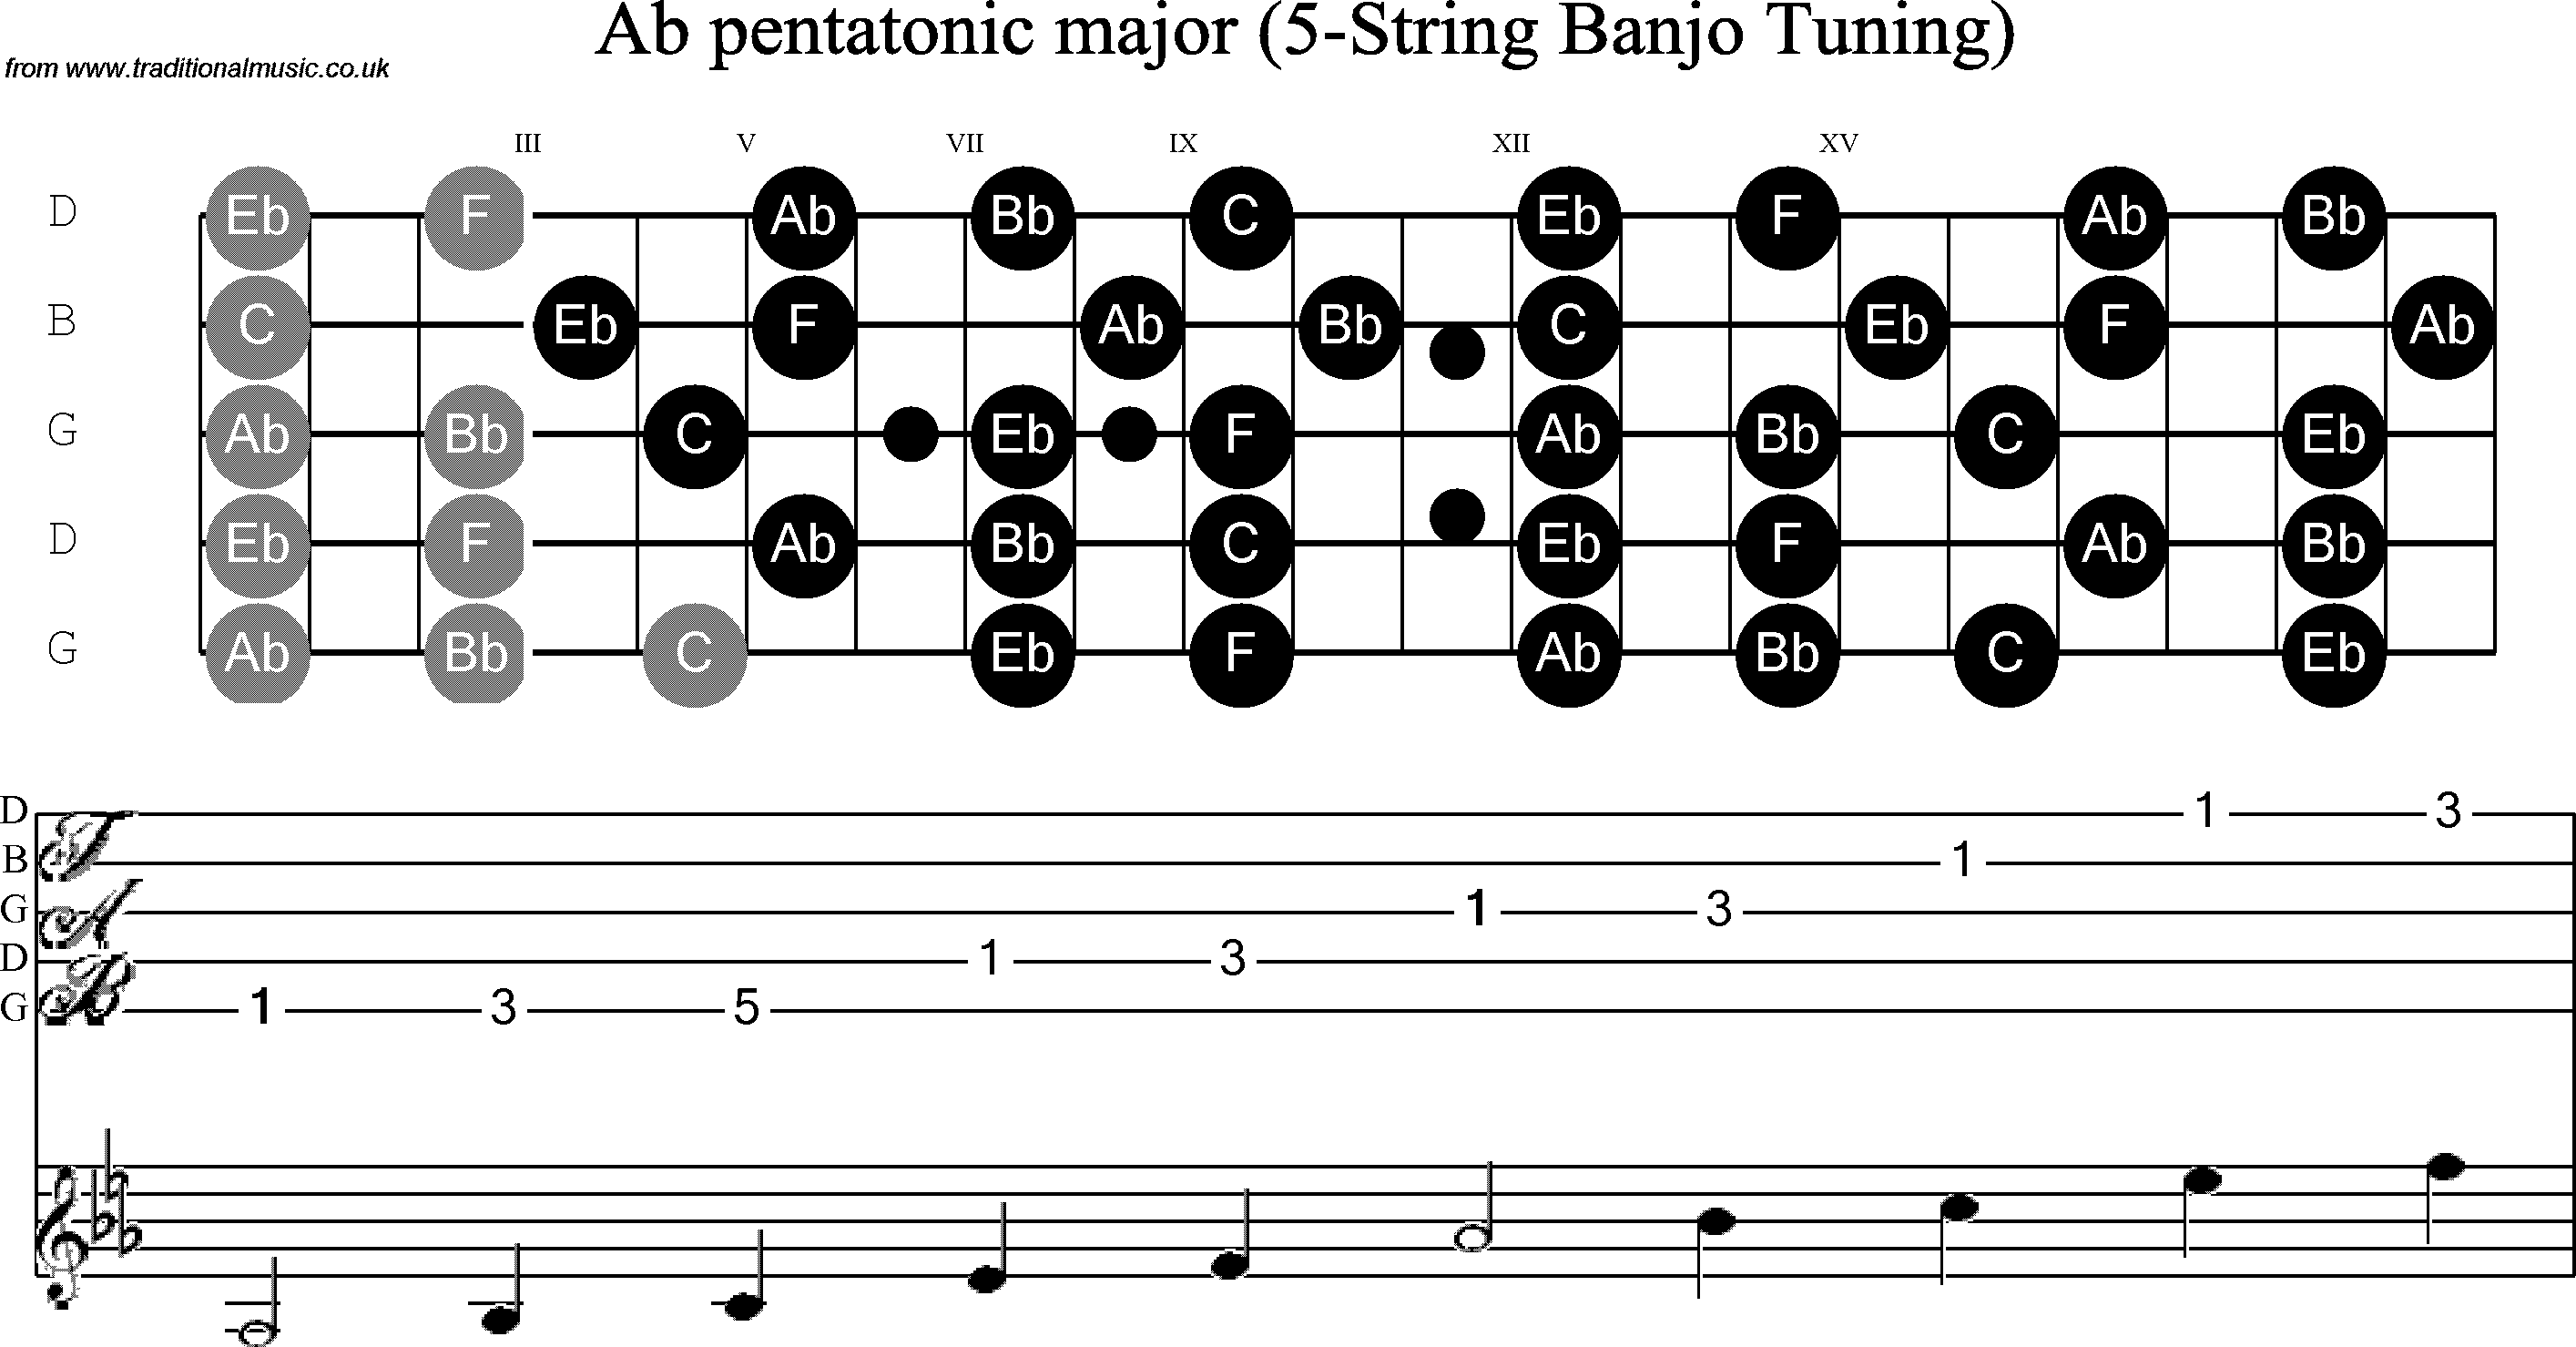 Scale, stave and neck diagram for Banjo(G) Ab Pentatonic